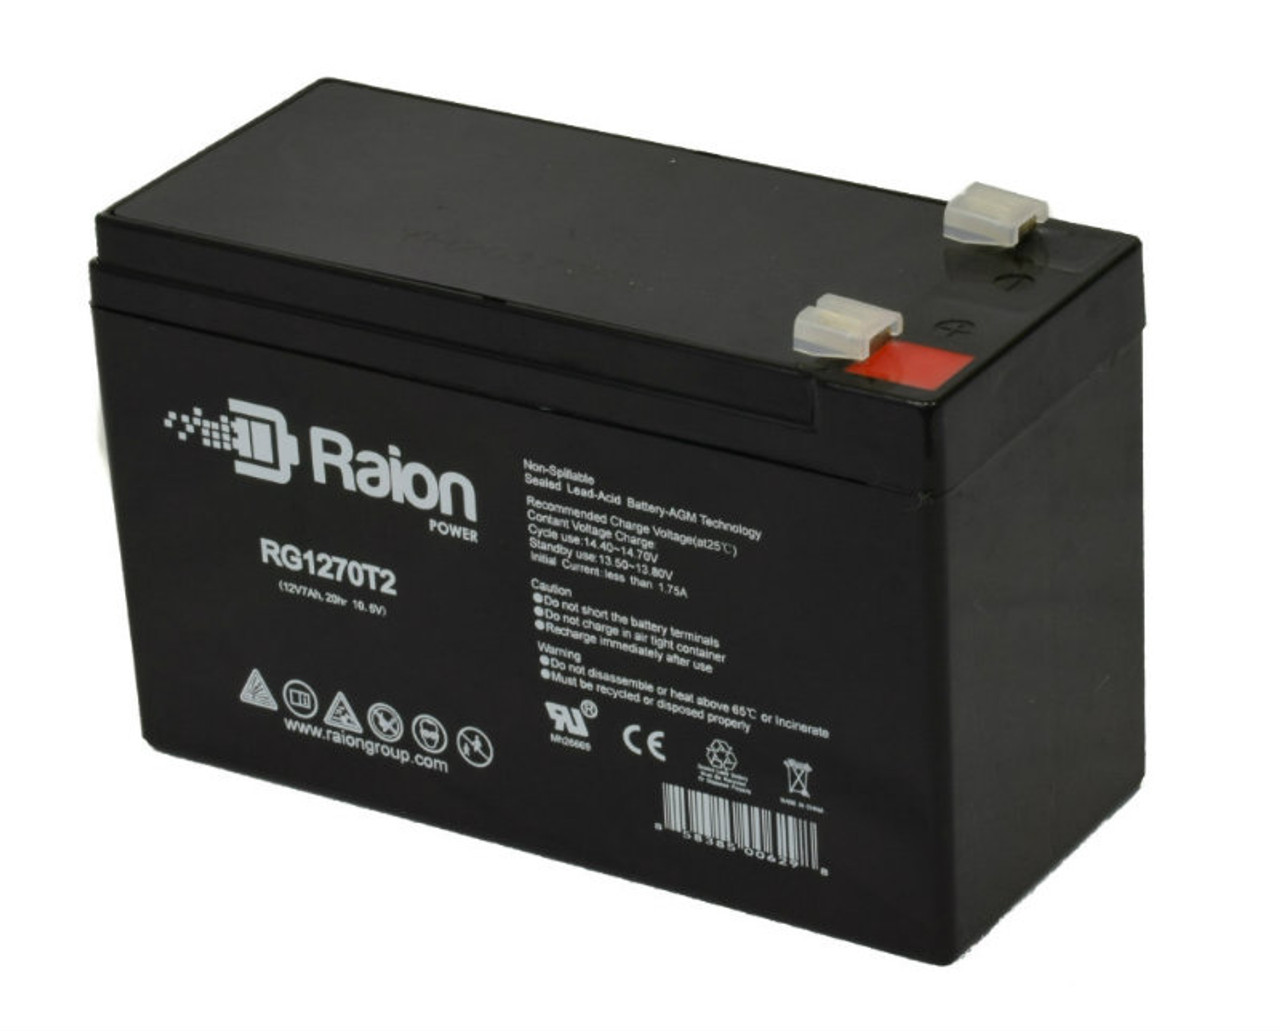 Raion Power RG1270T1 12V 7Ah Non-Spillable Replacement Battery for Europower EH 7-12